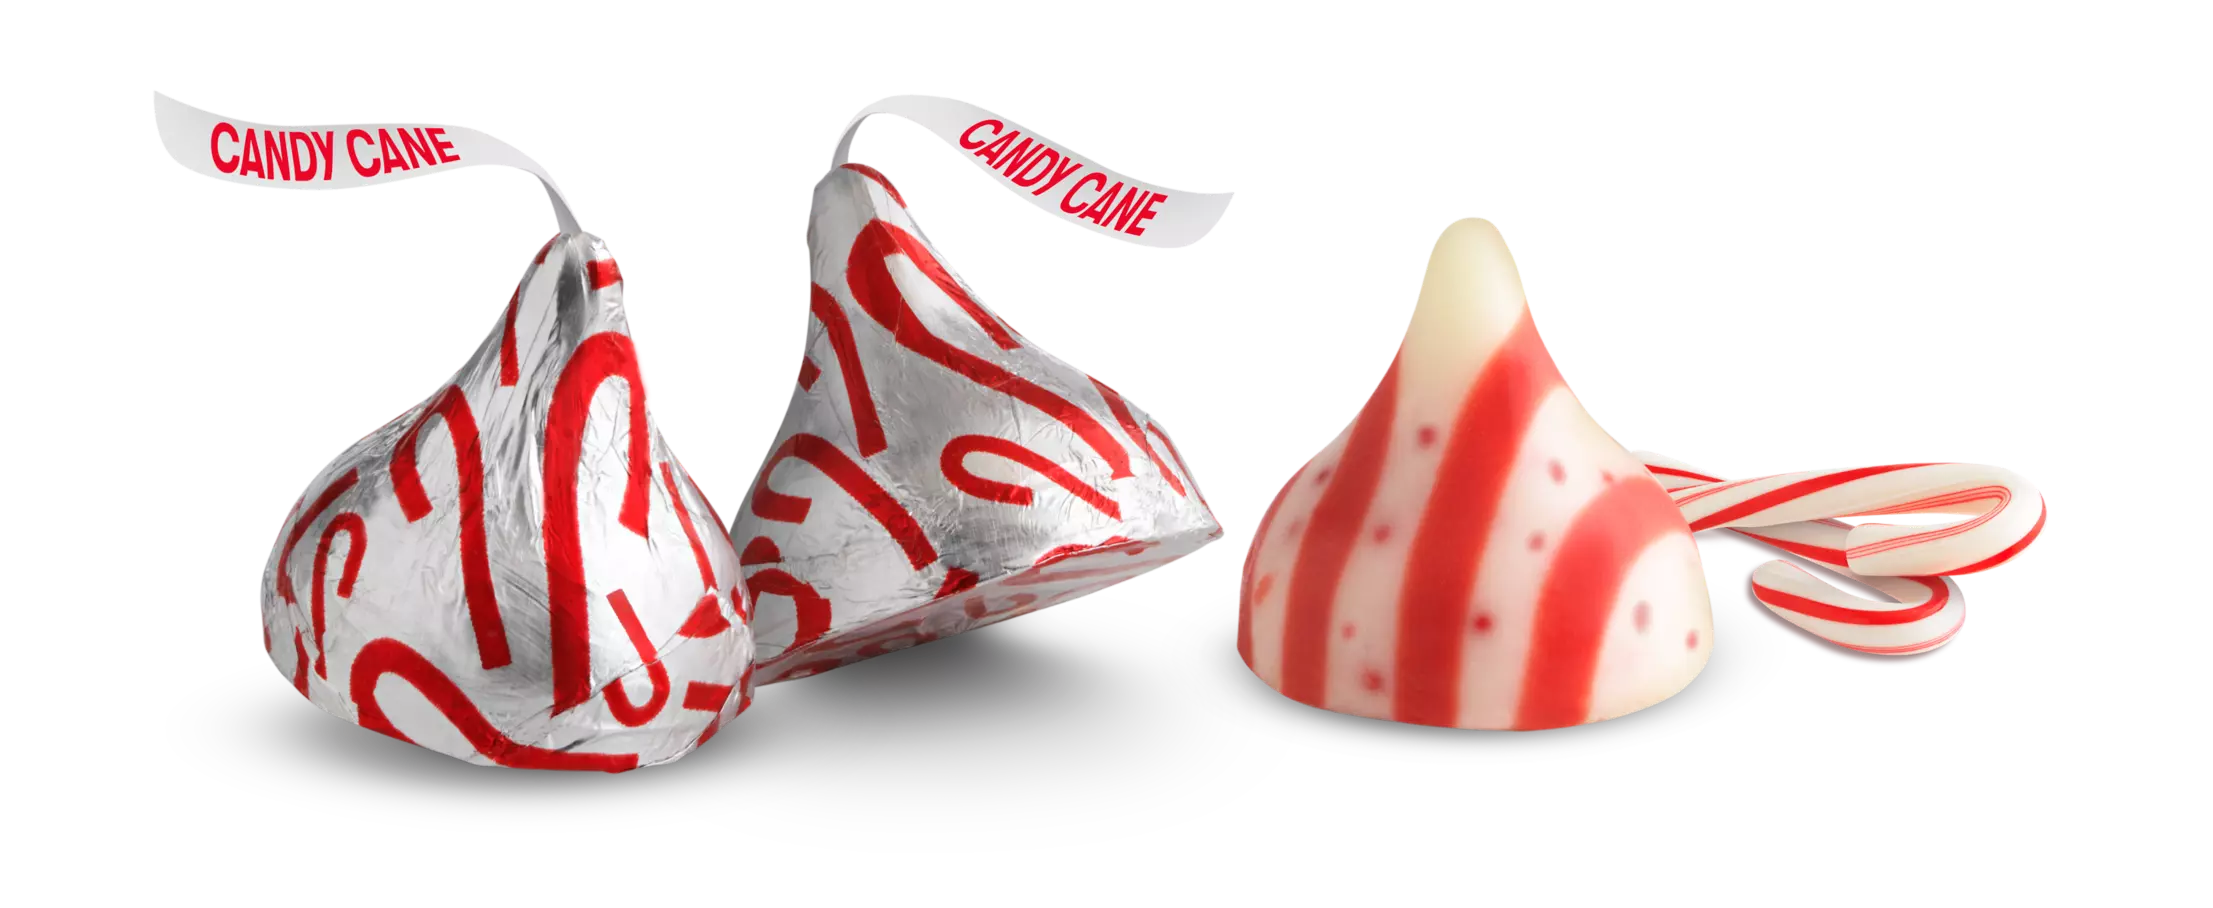 HERSHEY'S KISSES Candy Cane Mint Candy, 7 oz bag - Out of Package